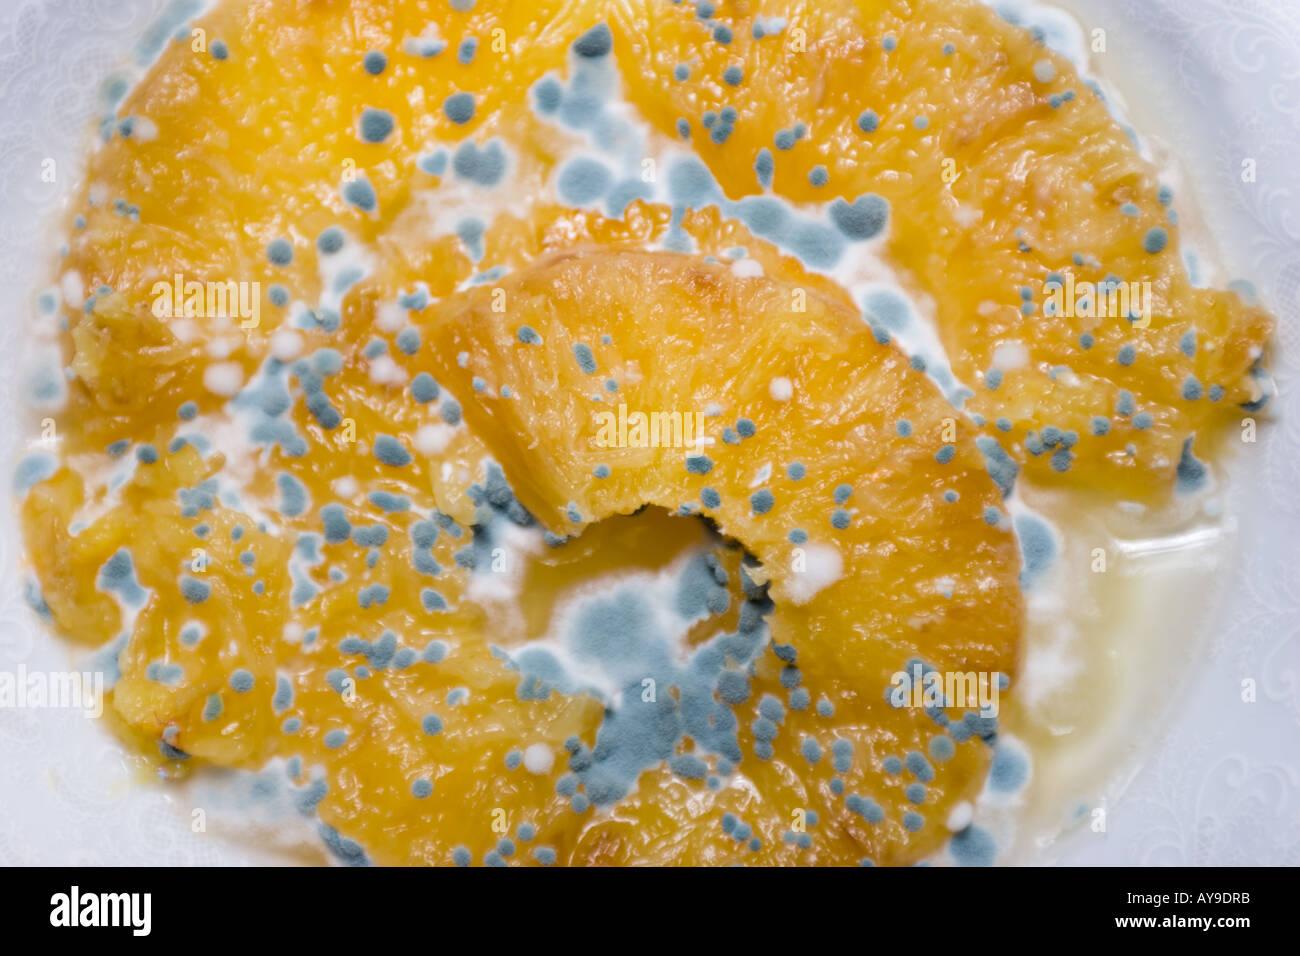 mould on pineapple fruit Stock Photo